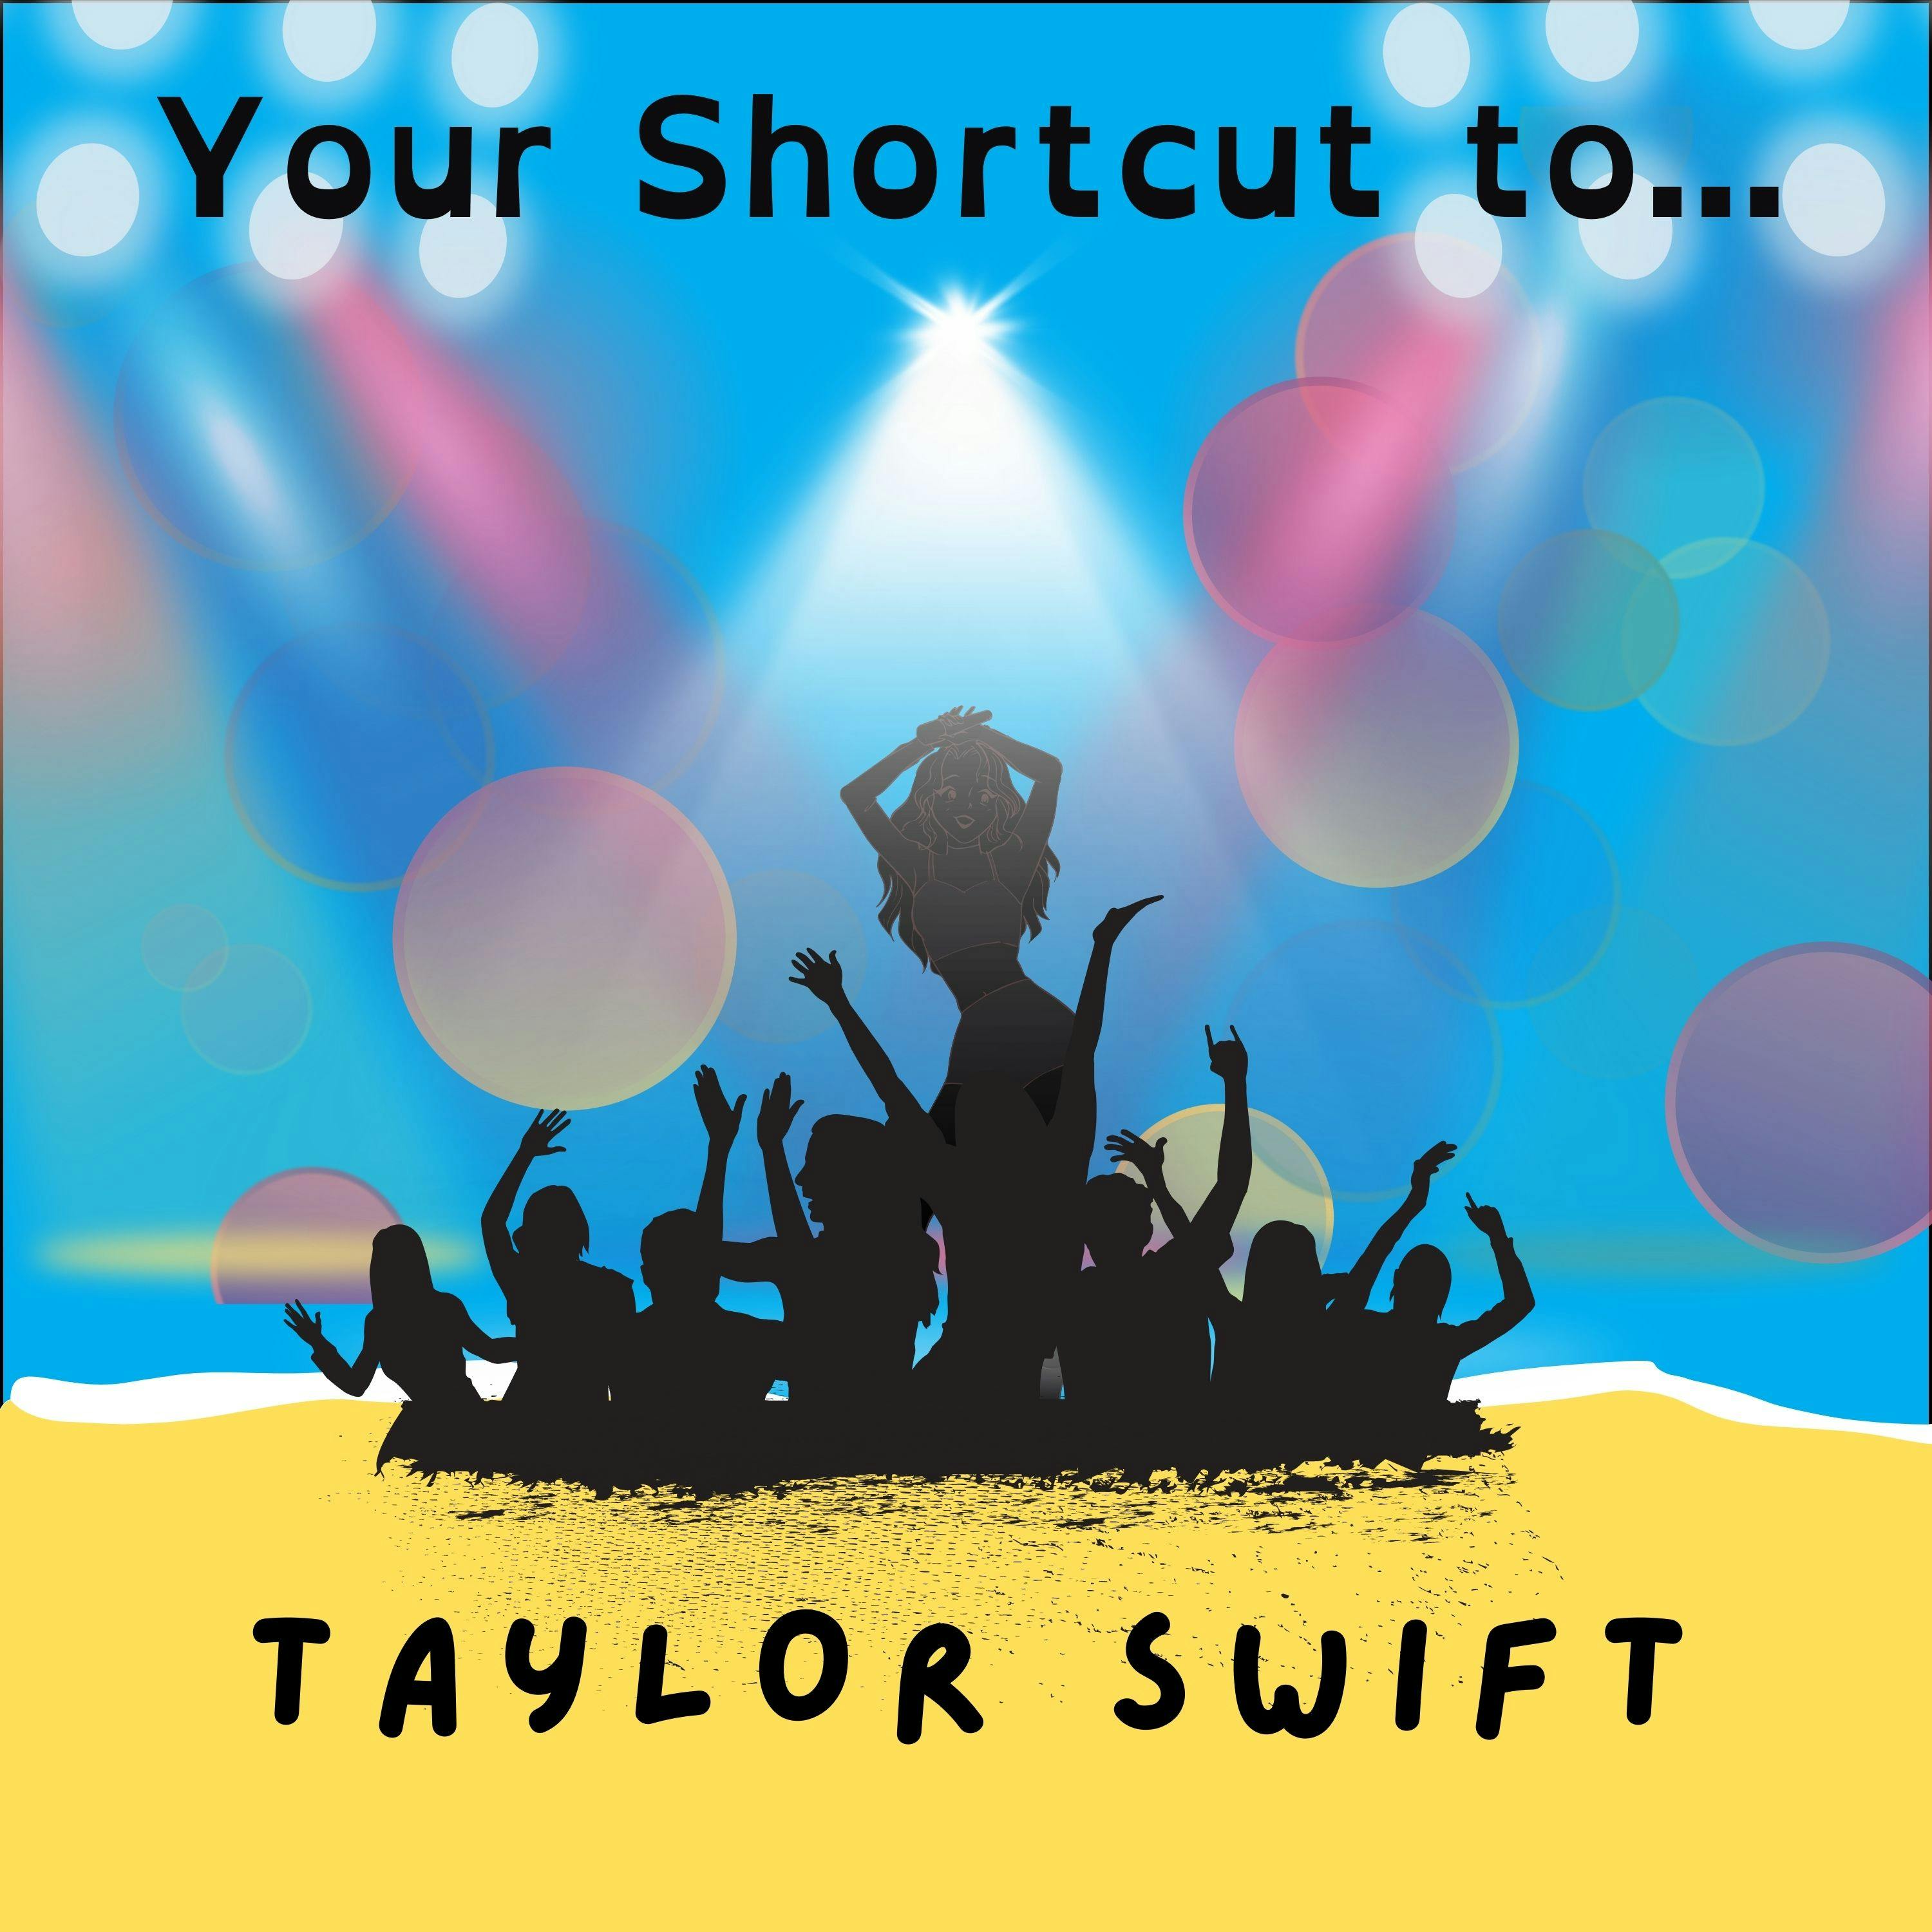 Your Shortcut to... Taylor Swift